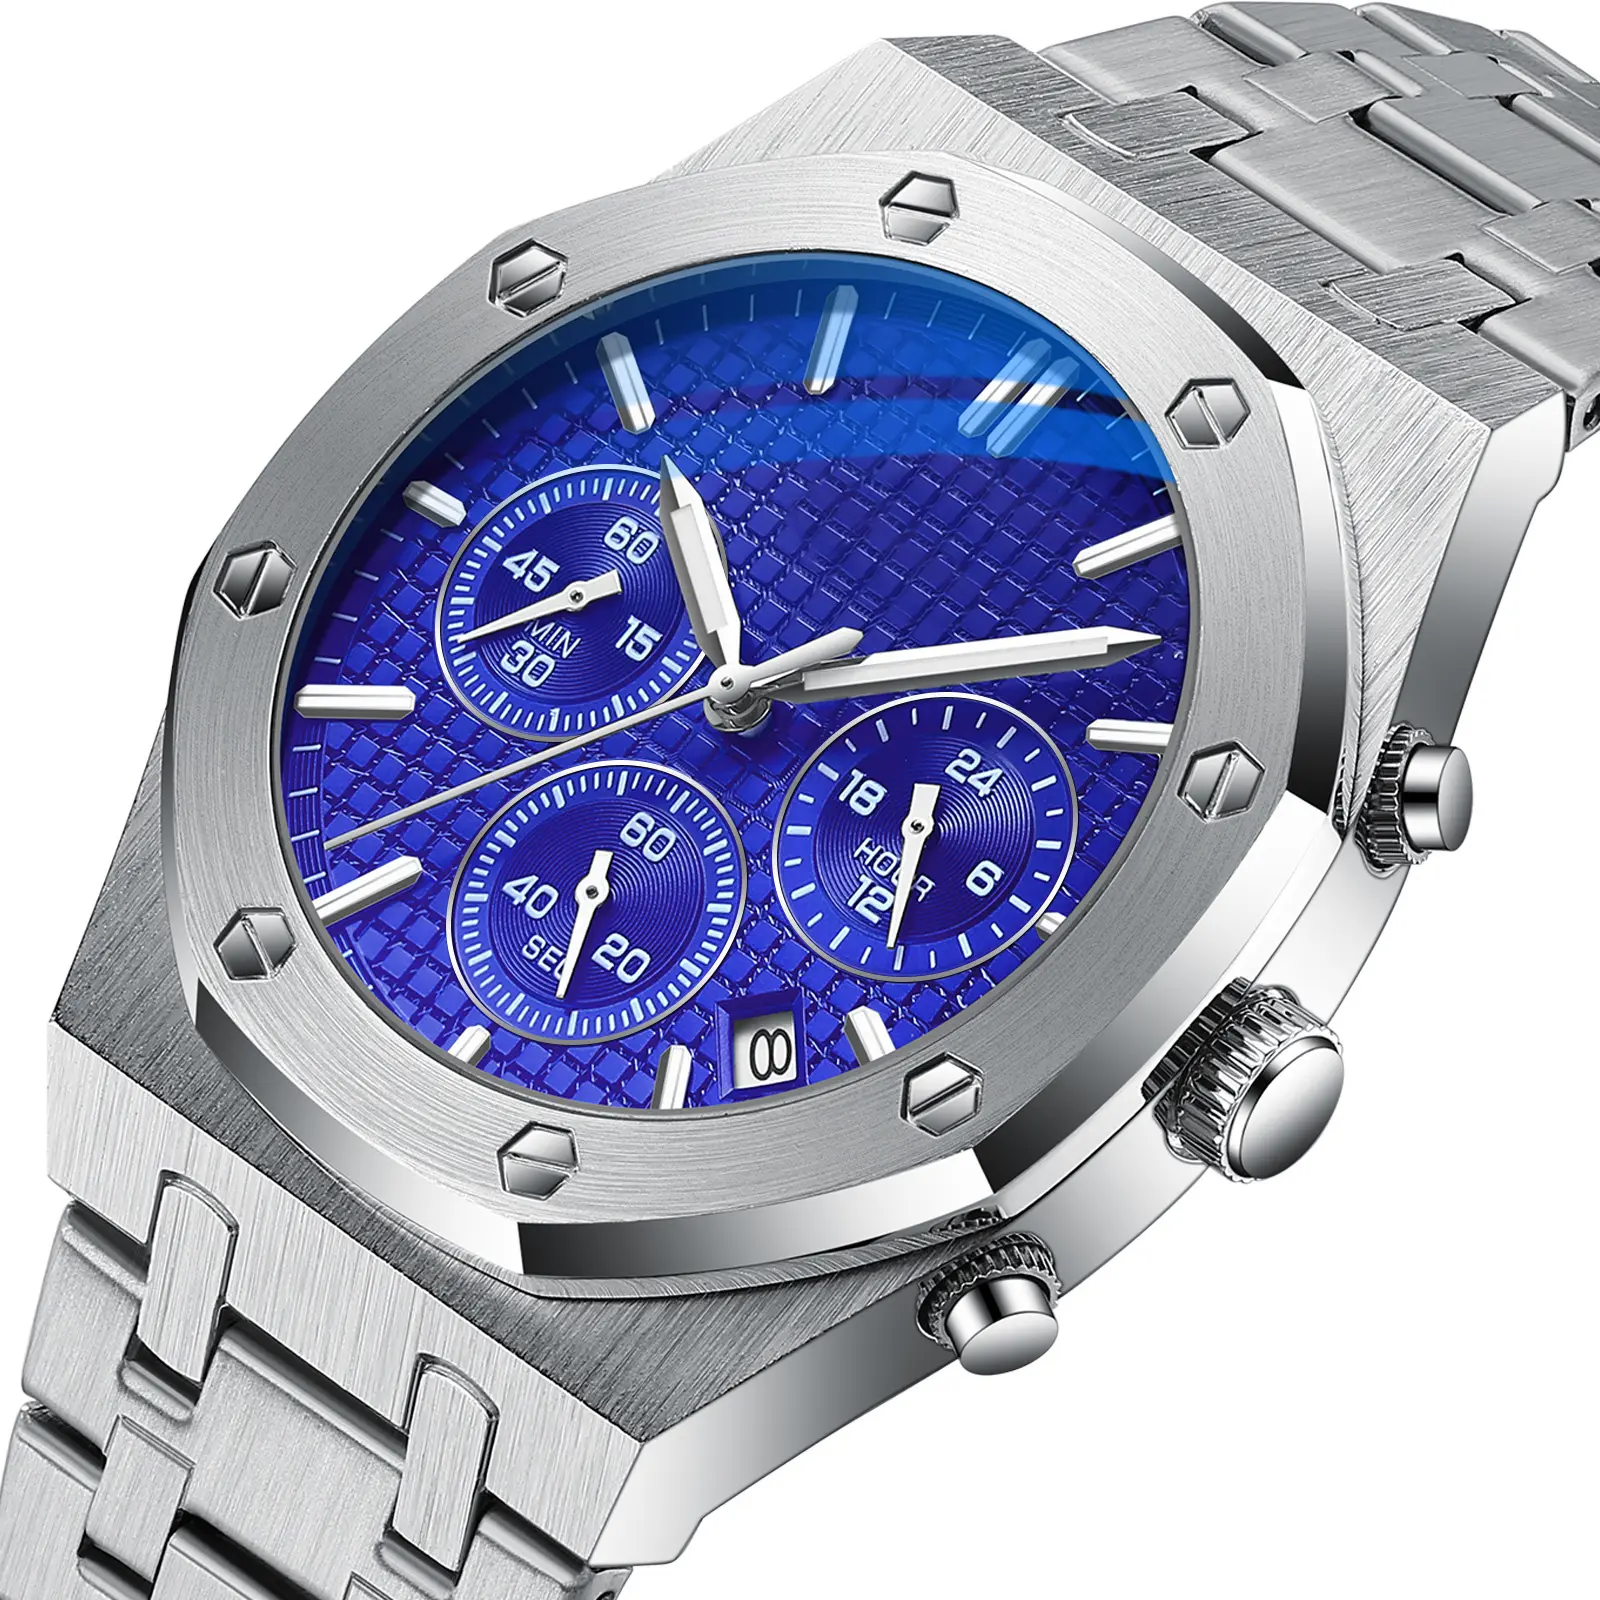 New HOT selling 2021 Stainless steel watch Relojes Hombre Original Chronograph Wristwatch Luxury Quartz Watches for men